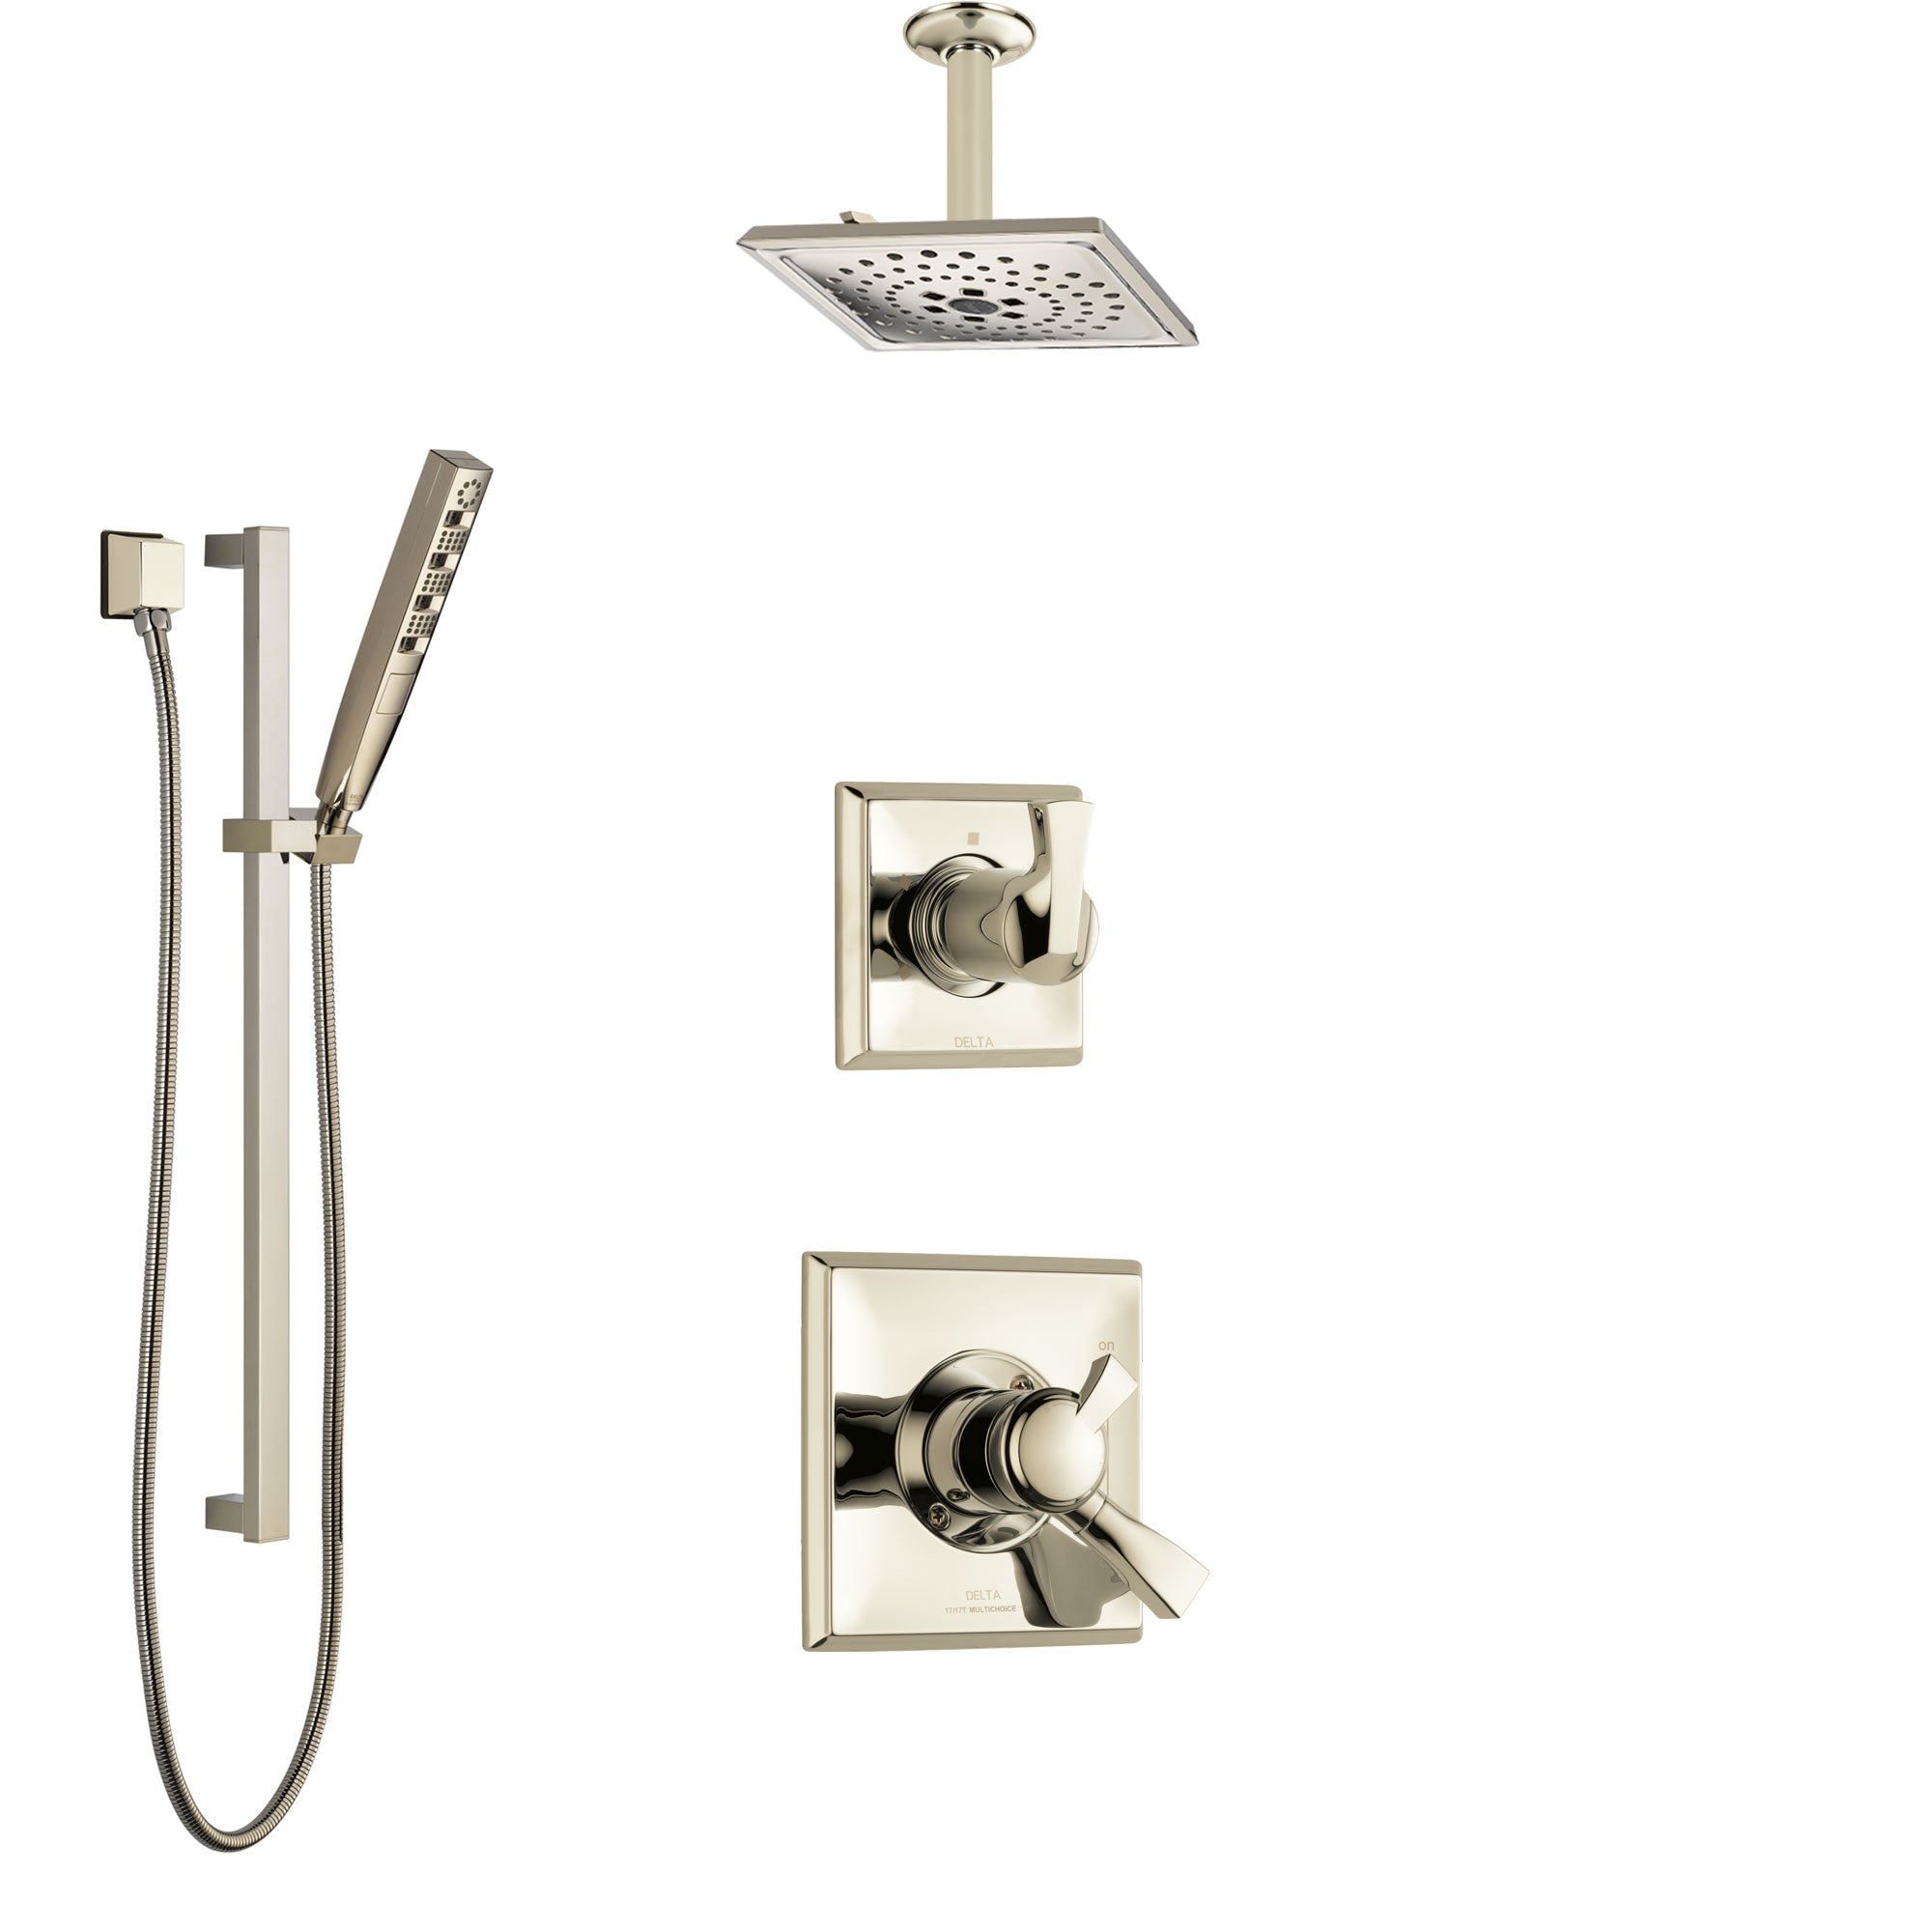 Delta Dryden Polished Nickel Shower System with Dual Control Handle, Diverter, Ceiling Mount Showerhead, and Hand Shower with Slidebar SS1751PN4